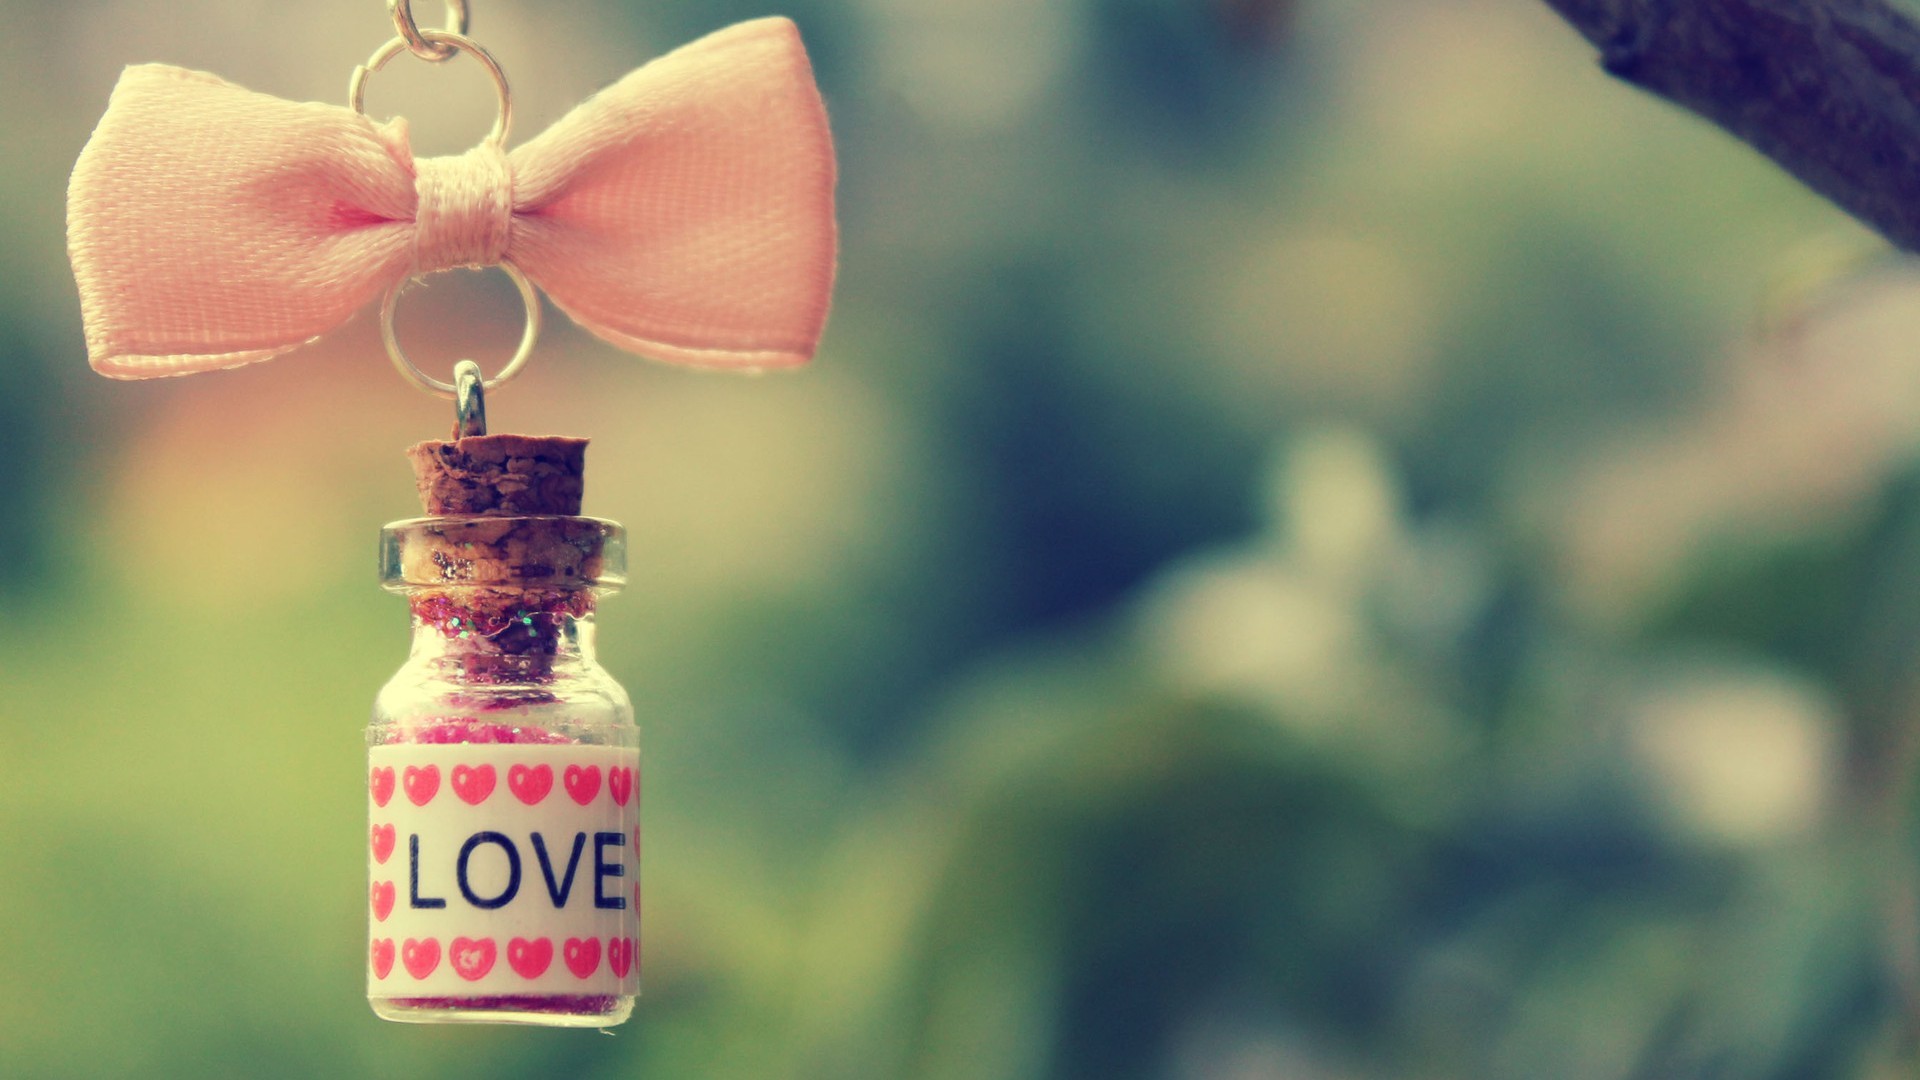 Cute Girly - Cute Love Hd Wallpapers For Mobile - 1920x1080 Wallpaper -  